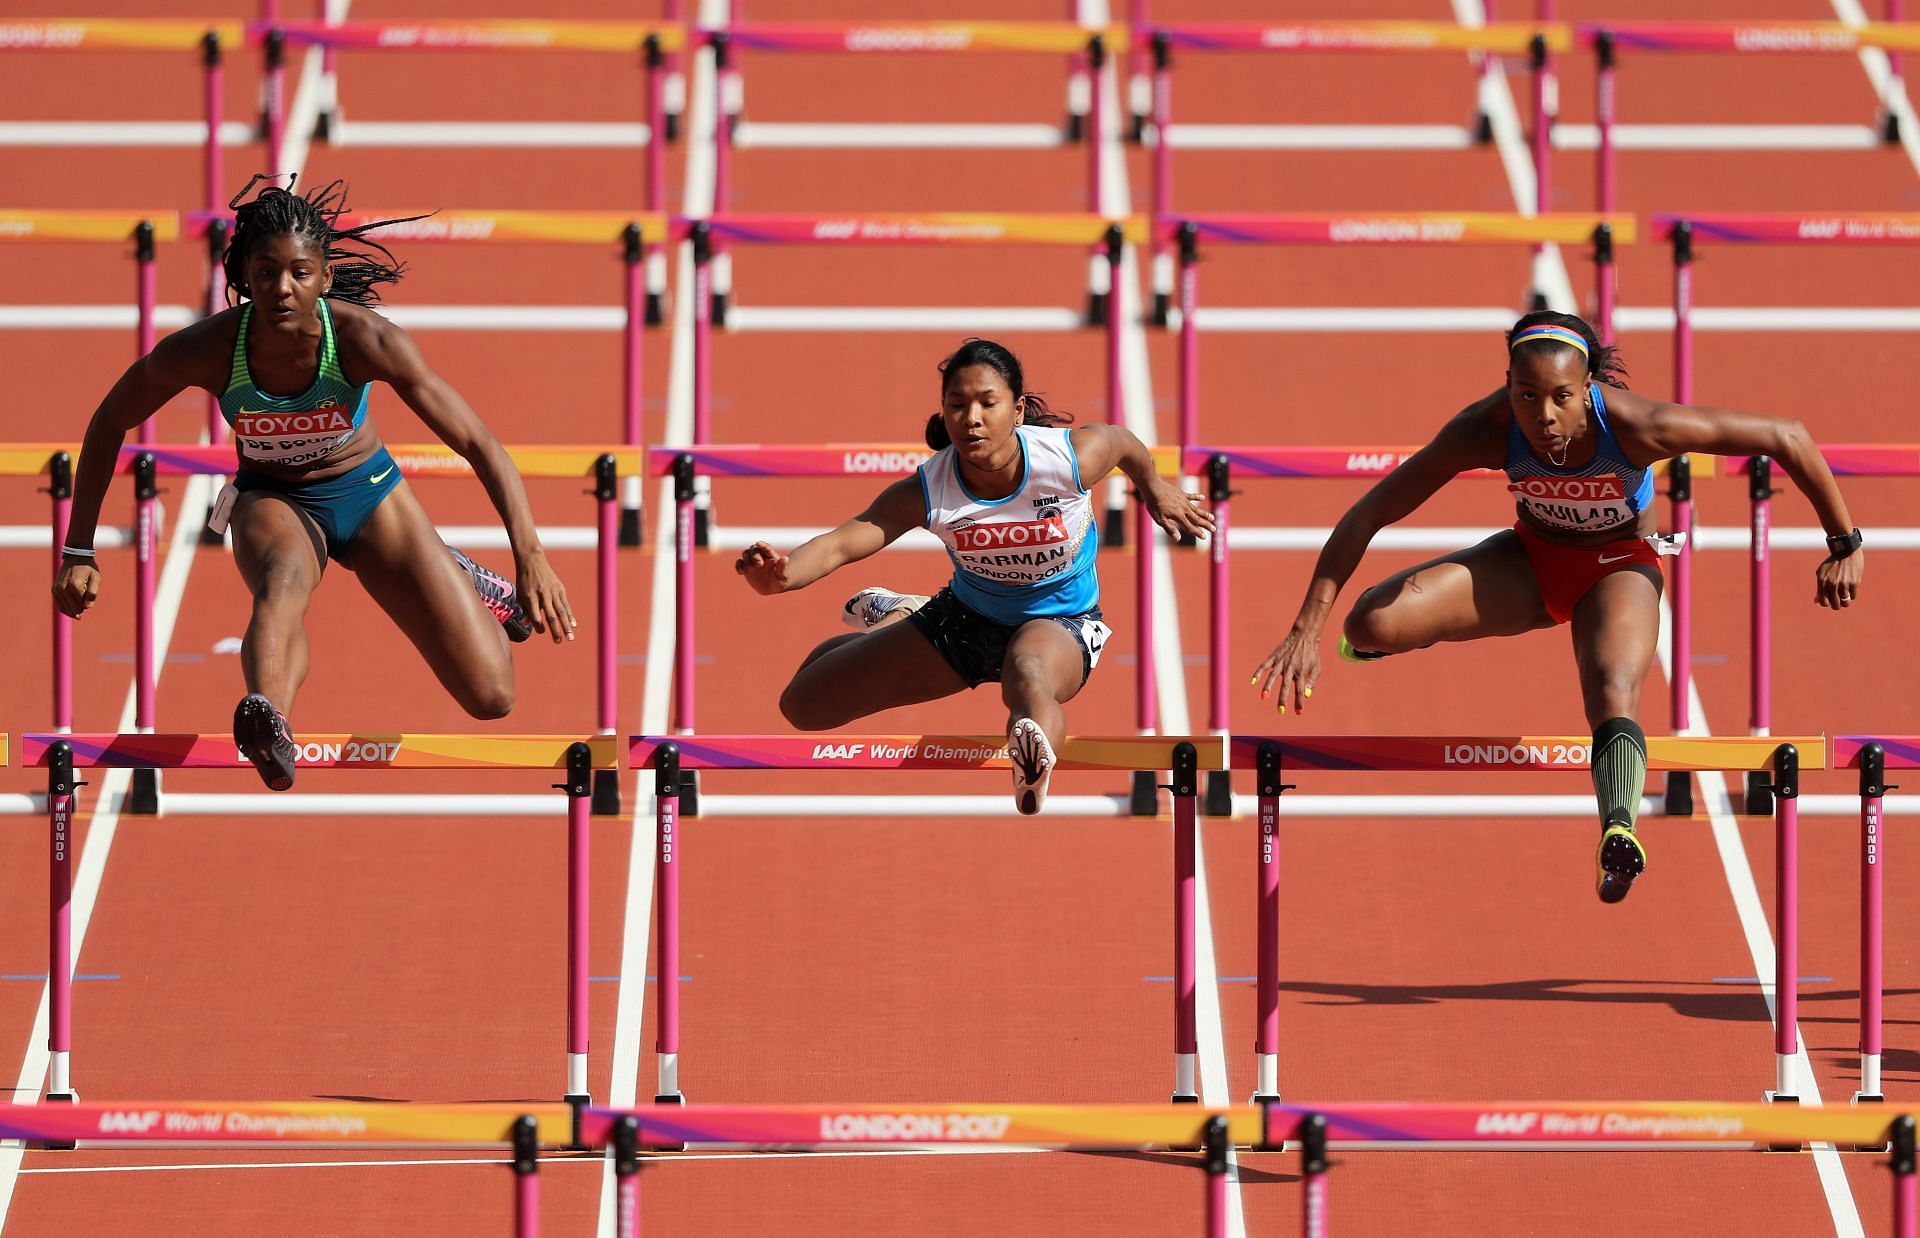 Swapna Barman had made a strong start ot her 2022 Asian Games campaign in the 100m hurdles.